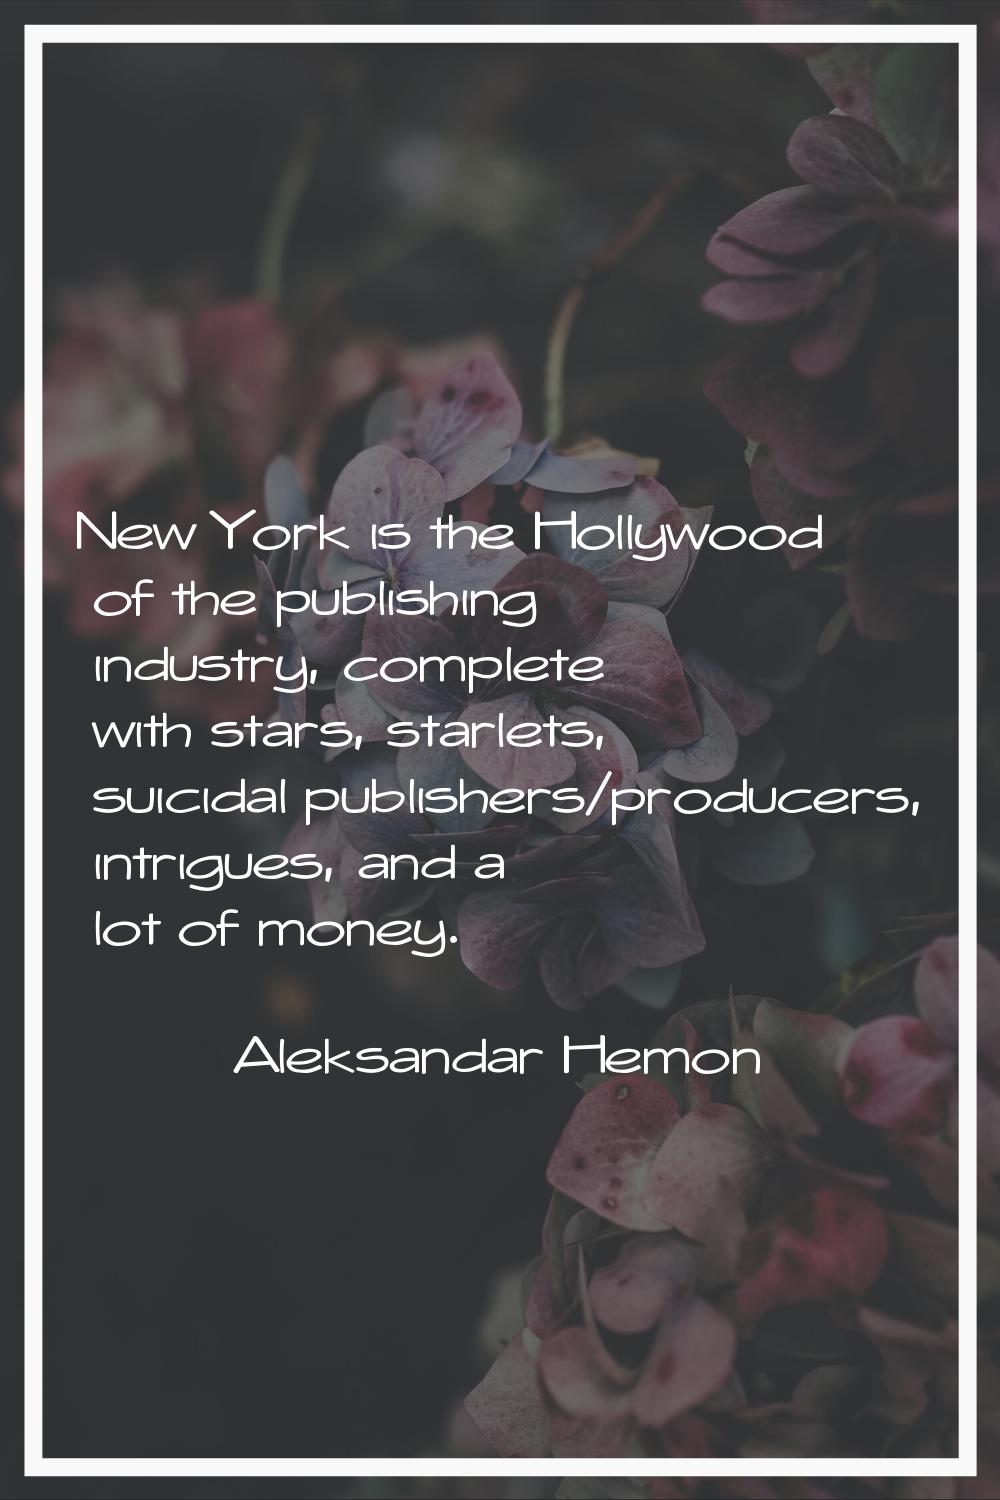 New York is the Hollywood of the publishing industry, complete with stars, starlets, suicidal publi